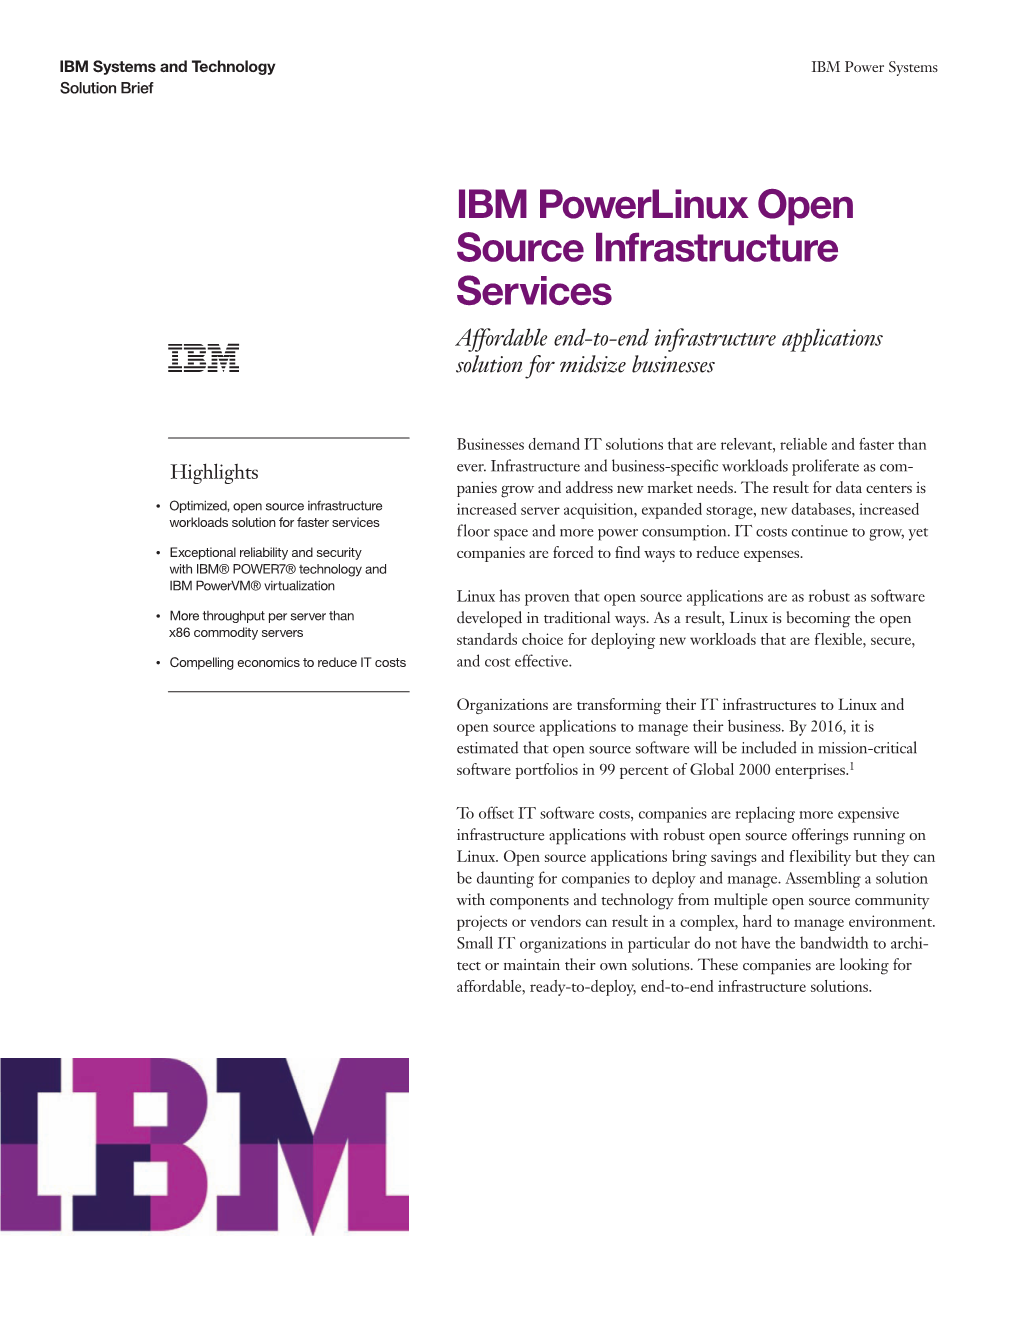 IBM Powerlinux Open Source Infrastructure Services Affordable End-To-End Infrastructure Applications Solution for Midsize Businesses